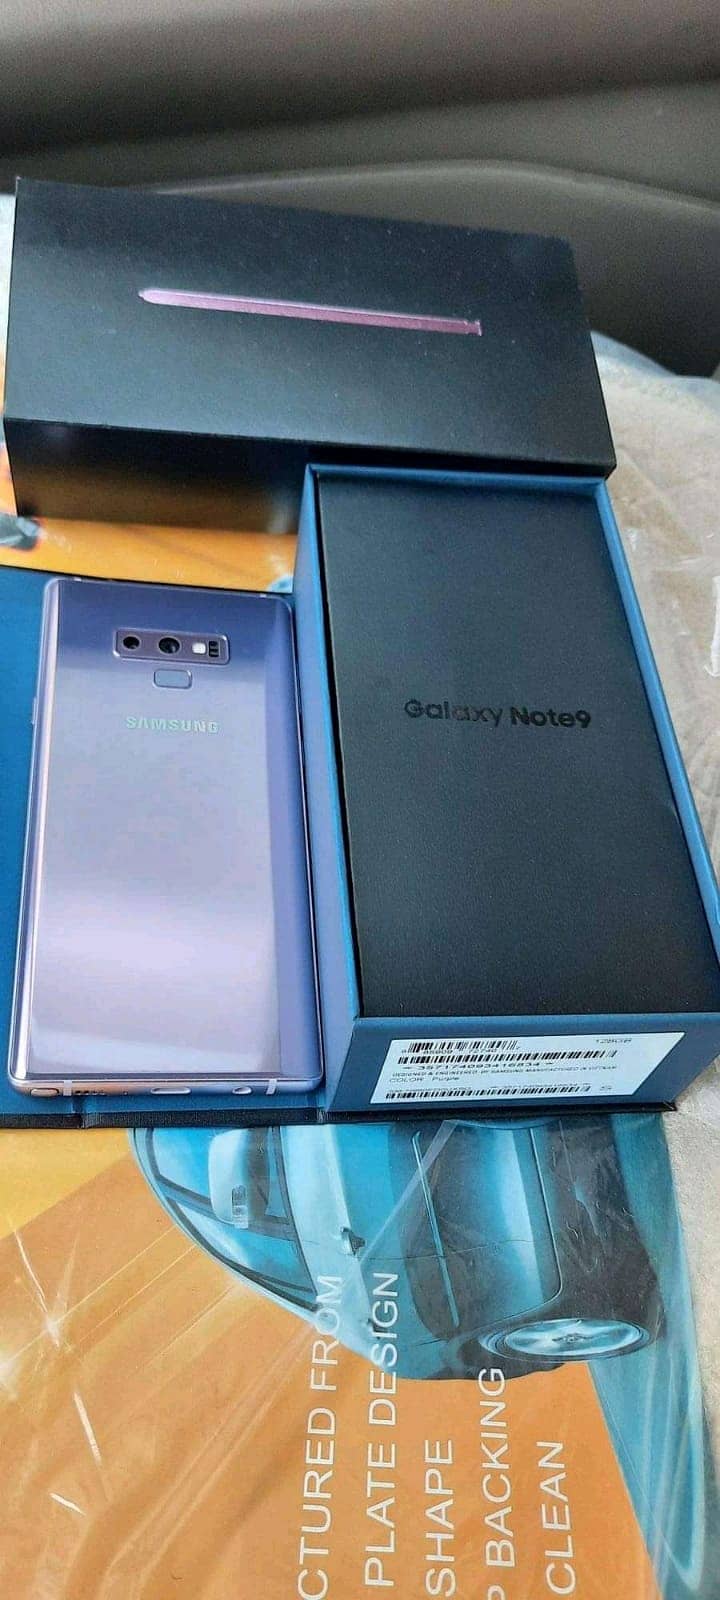 Samsung note9 6gb 128gb memory contact my whatsap number 0312/9838/293 0